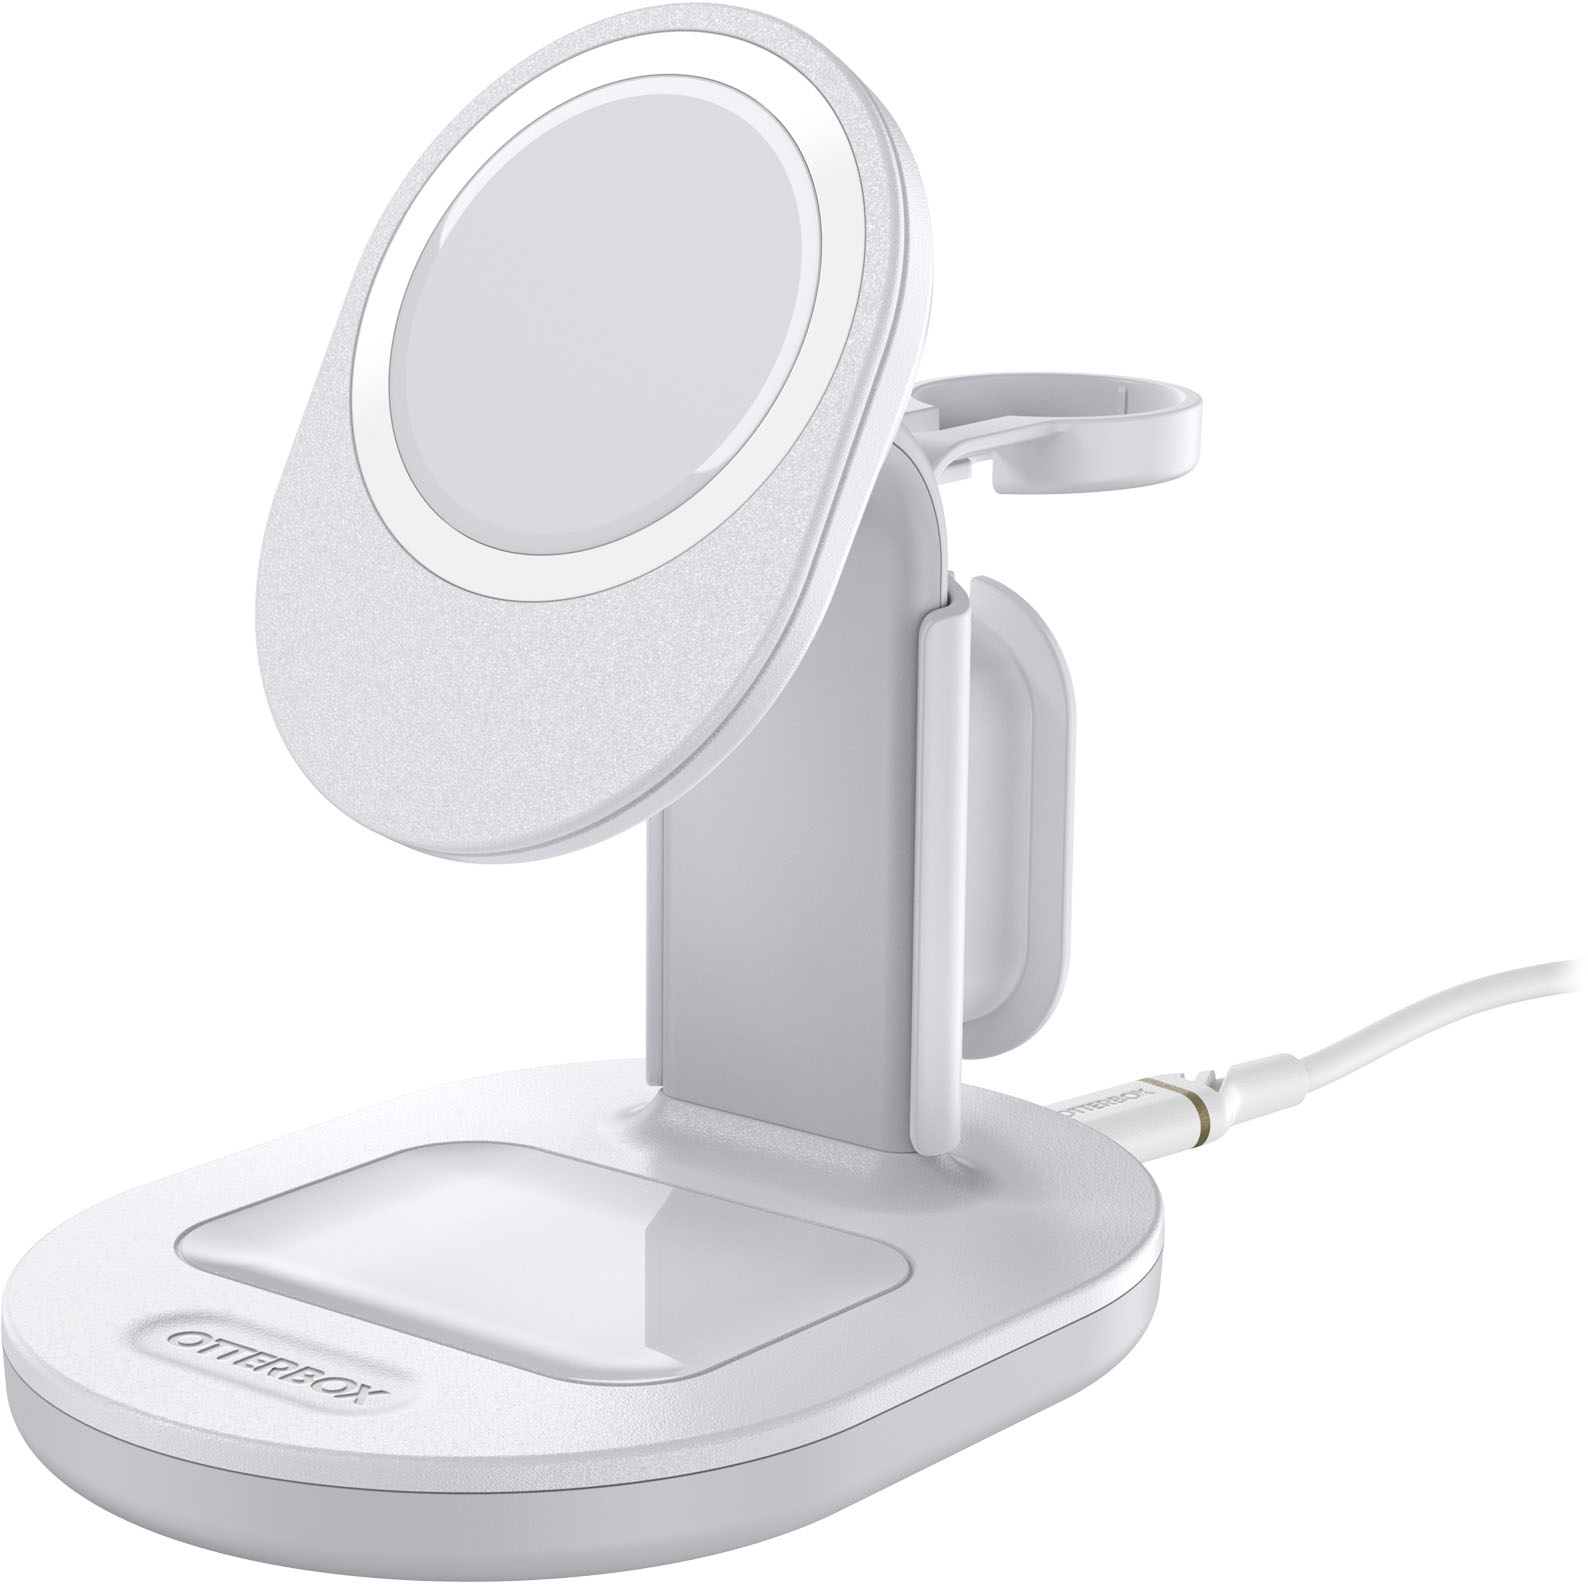  Belkin MagSafe Wireless Charger Pad - iPhone for 14, 13, 12 USB  C with 6.6' Cable & integrated Stand White Wall Not Included : Cell Phones  & Accessories